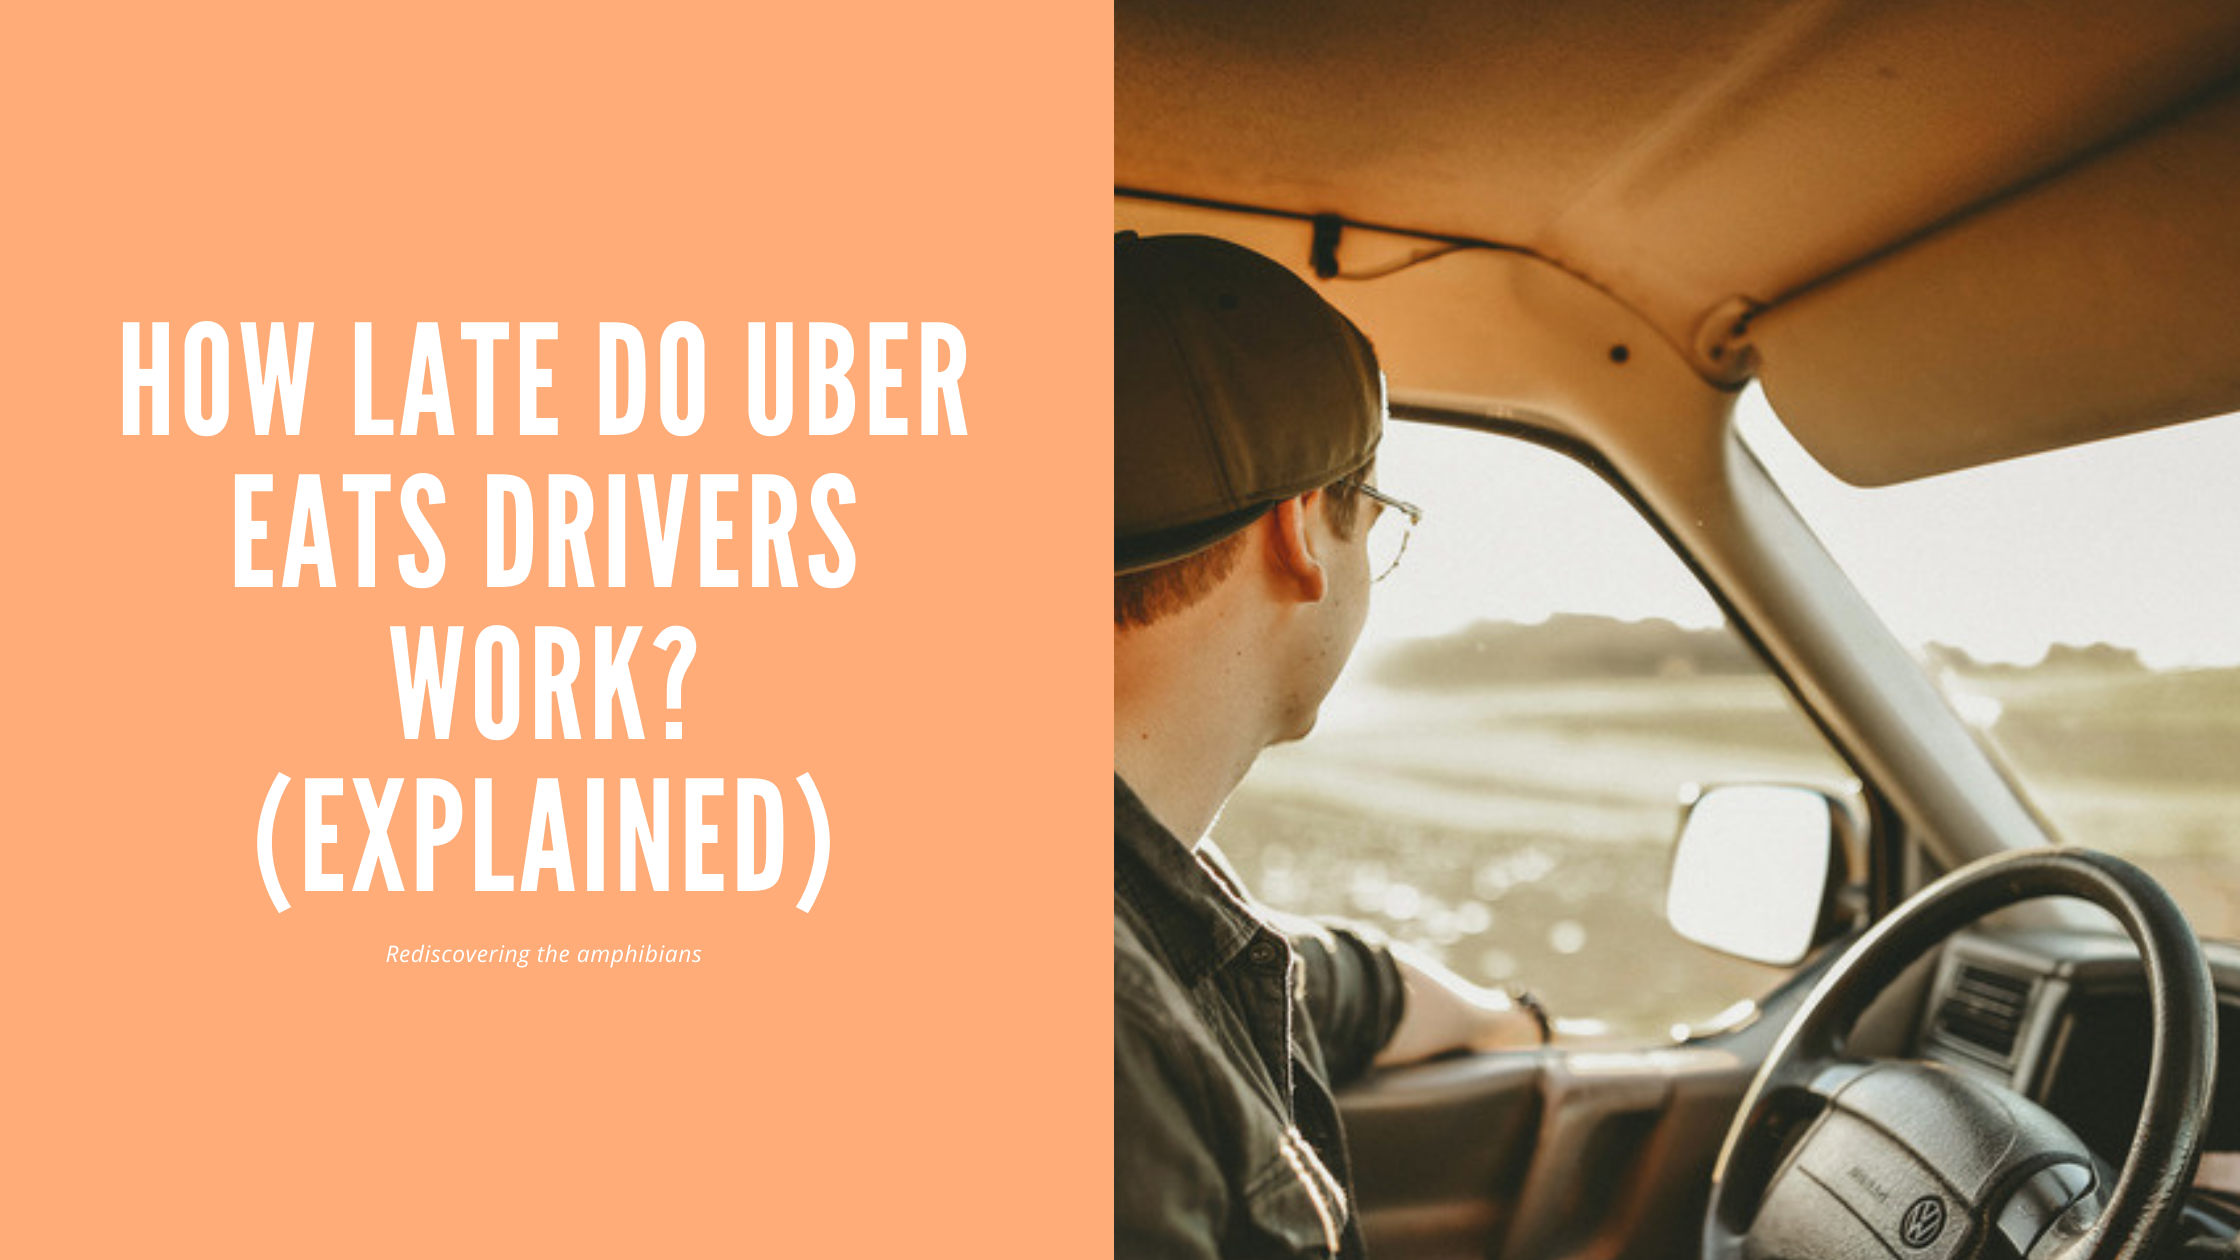 How Late Do Uber Eats Drivers Work? (Explained)